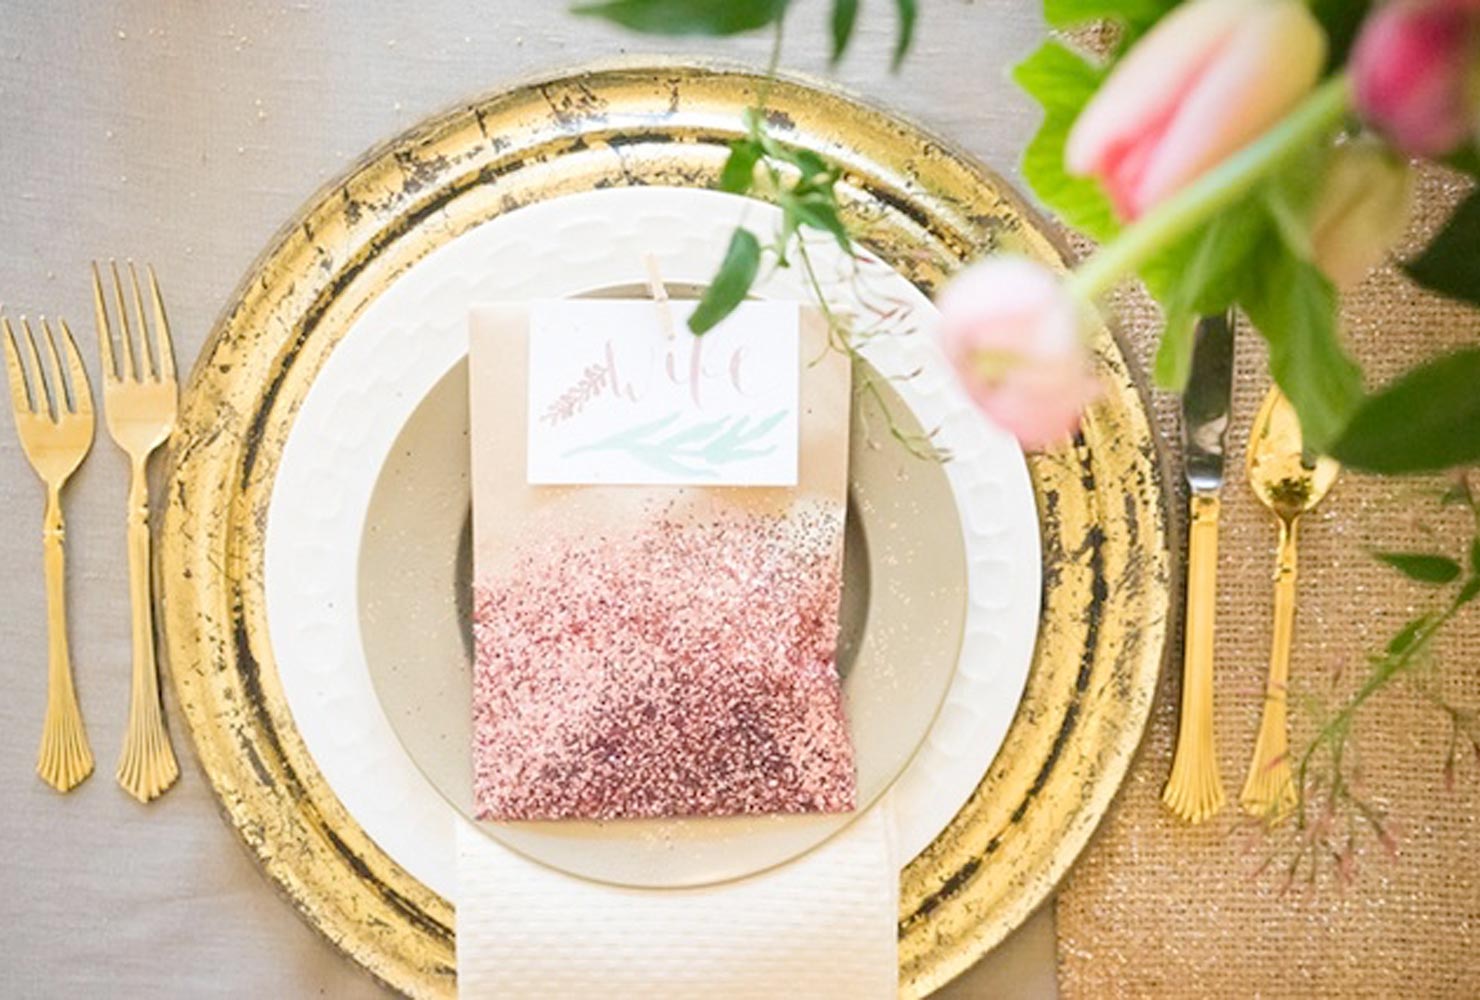 wedding place card ideas dipped in glitter